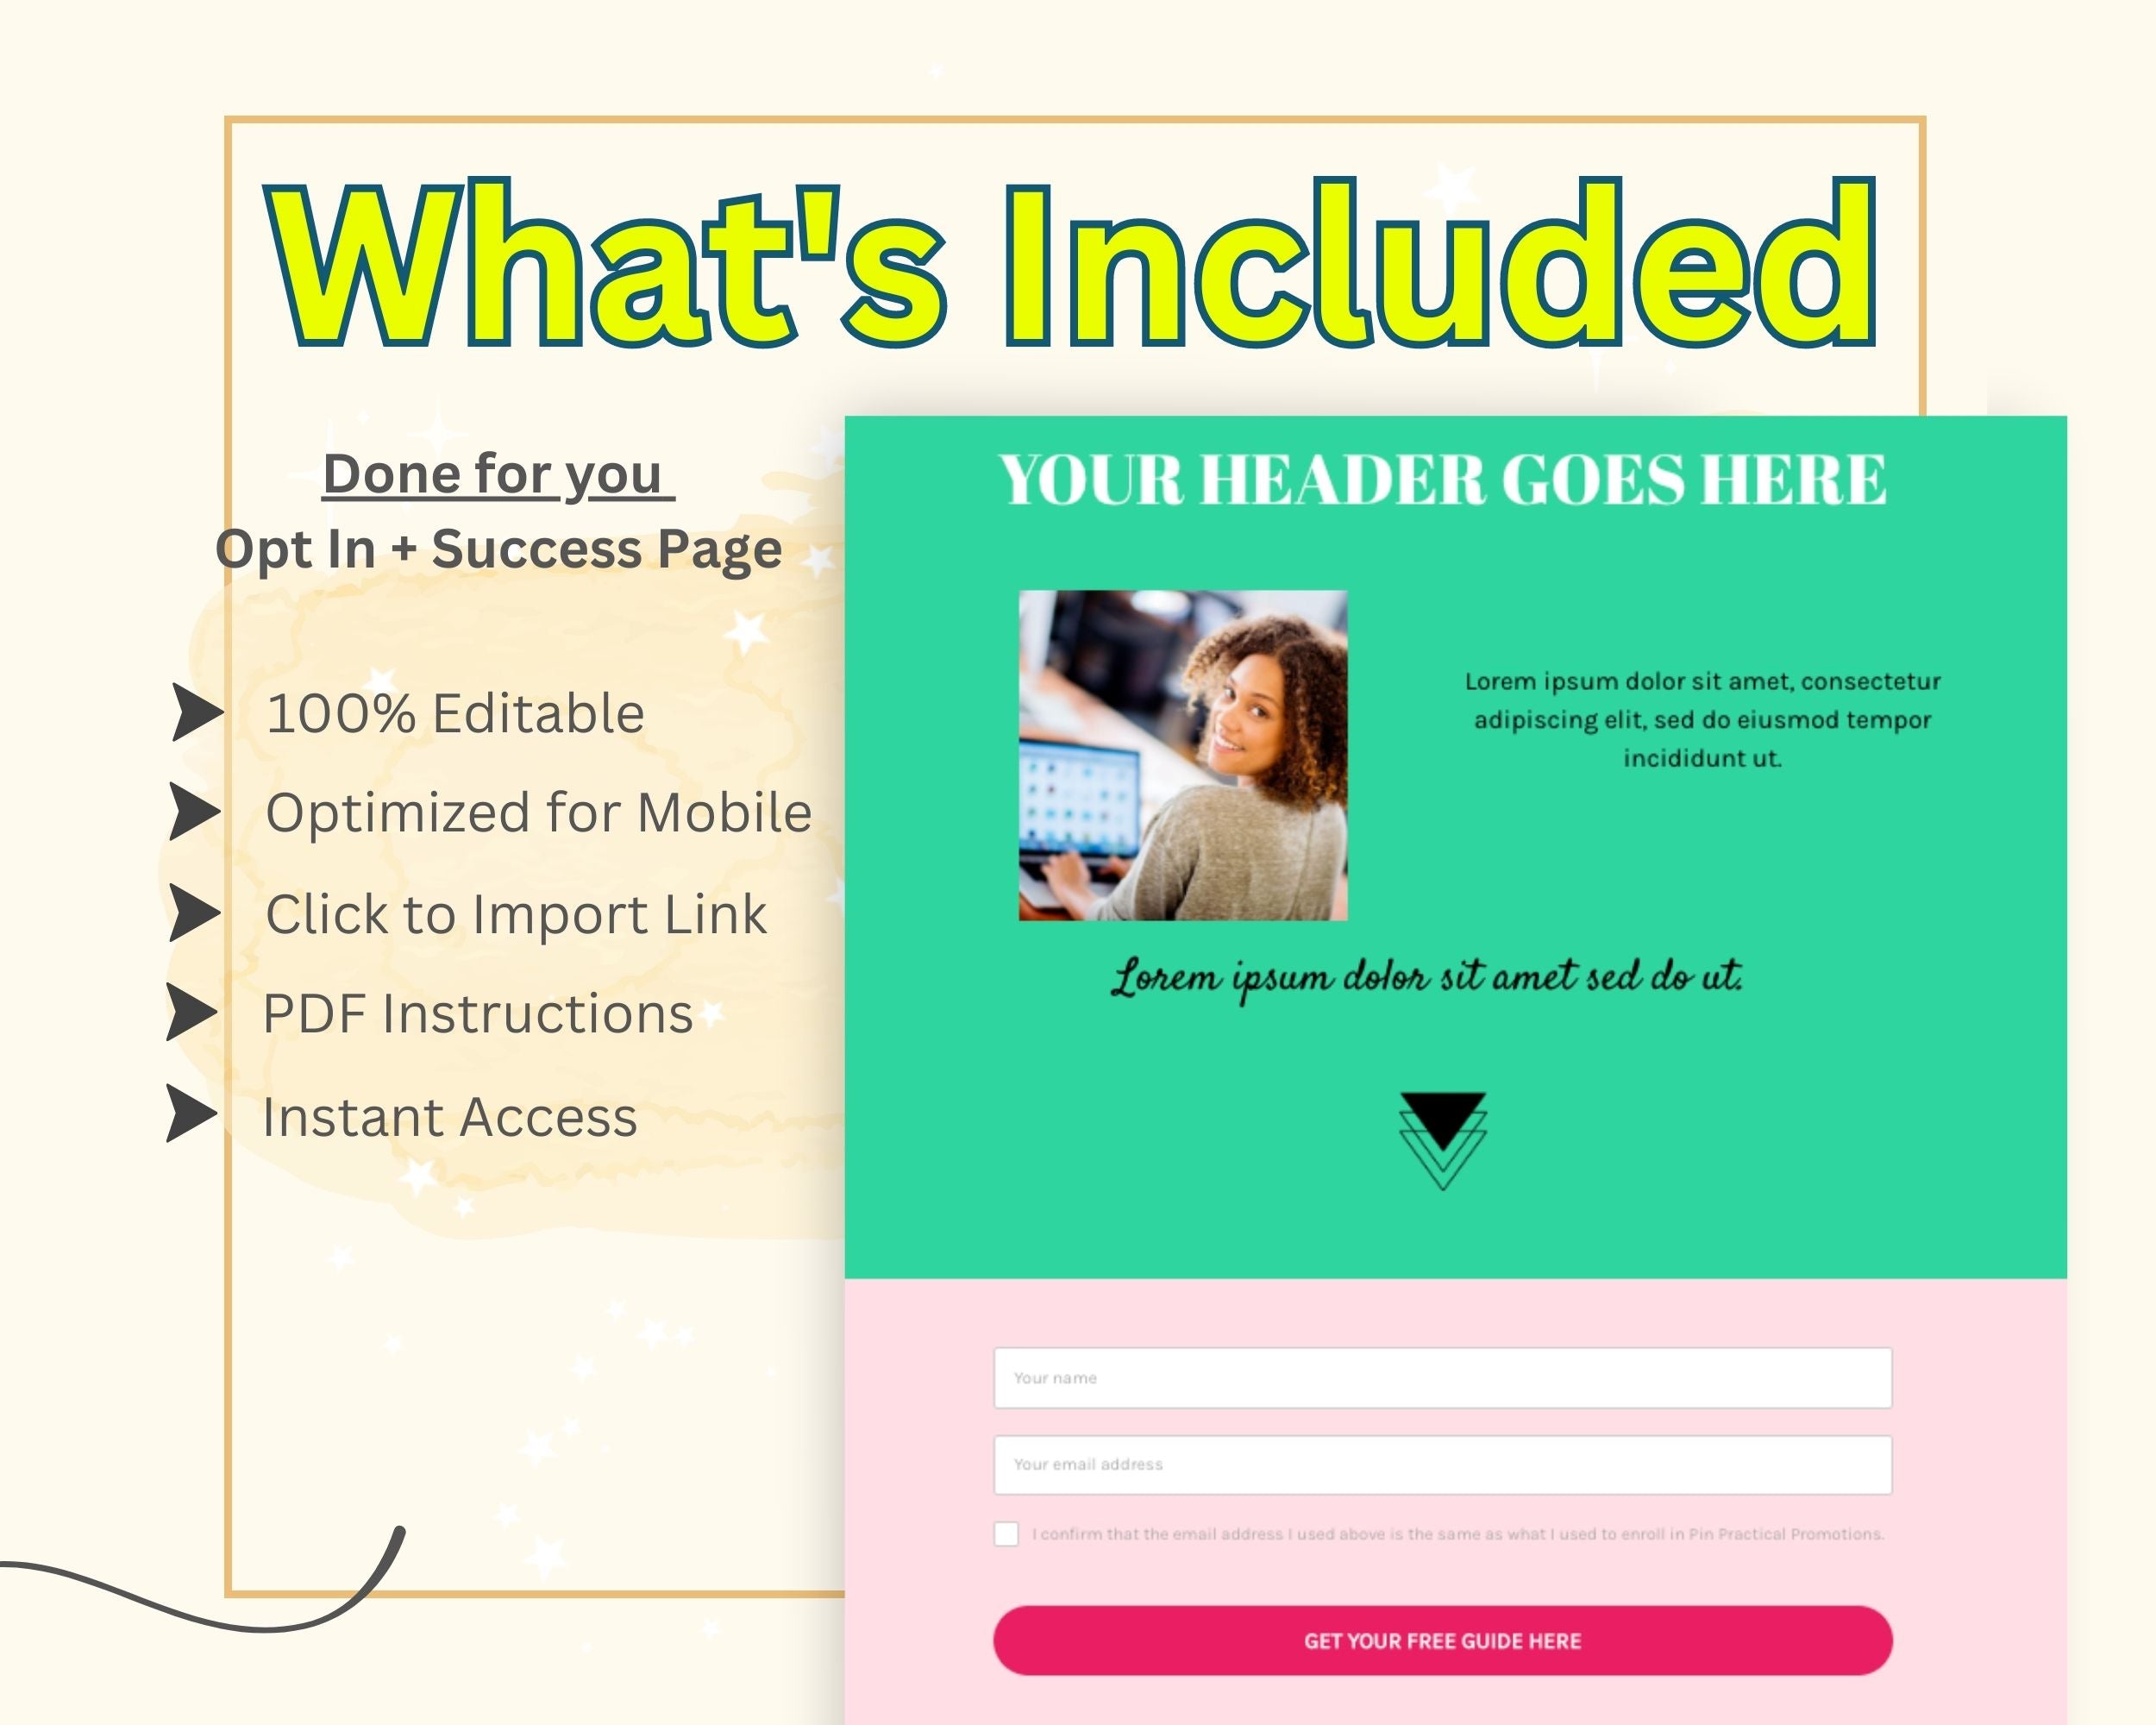 Colorful ThriveCart Opt-In Page Template